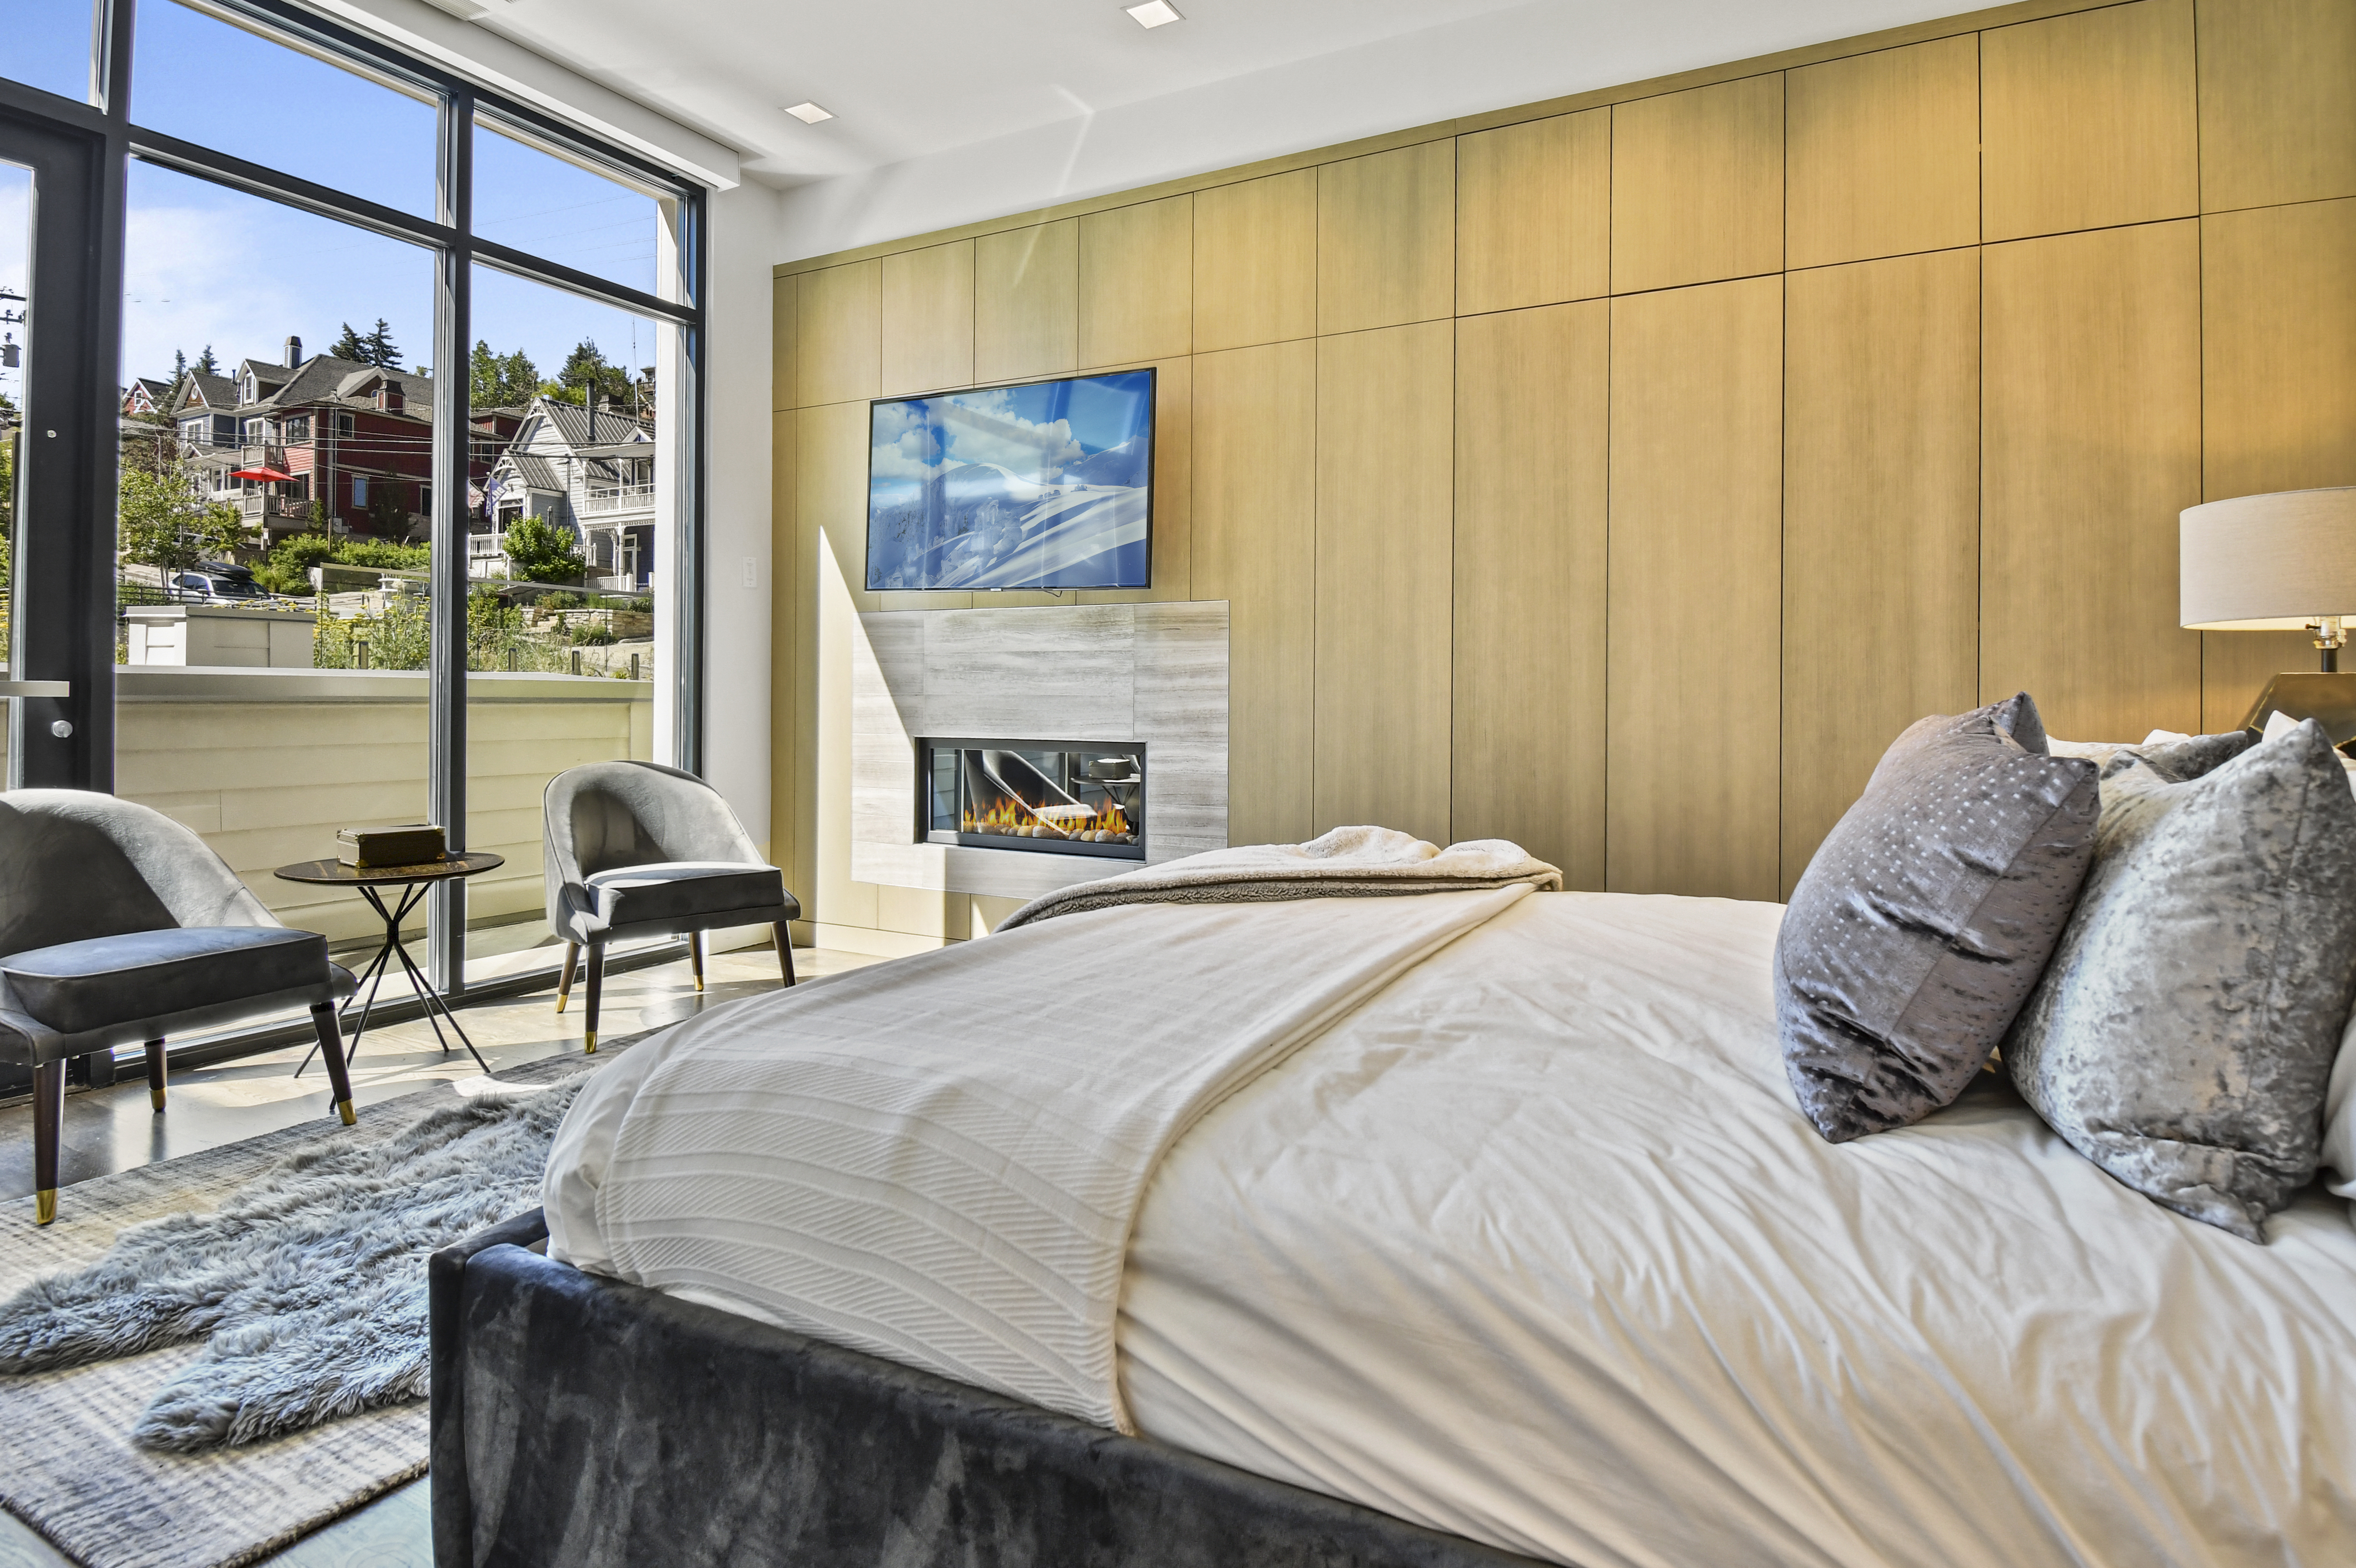 Master suite enjoys plenty of natural light from floor-to-ceiling windows.